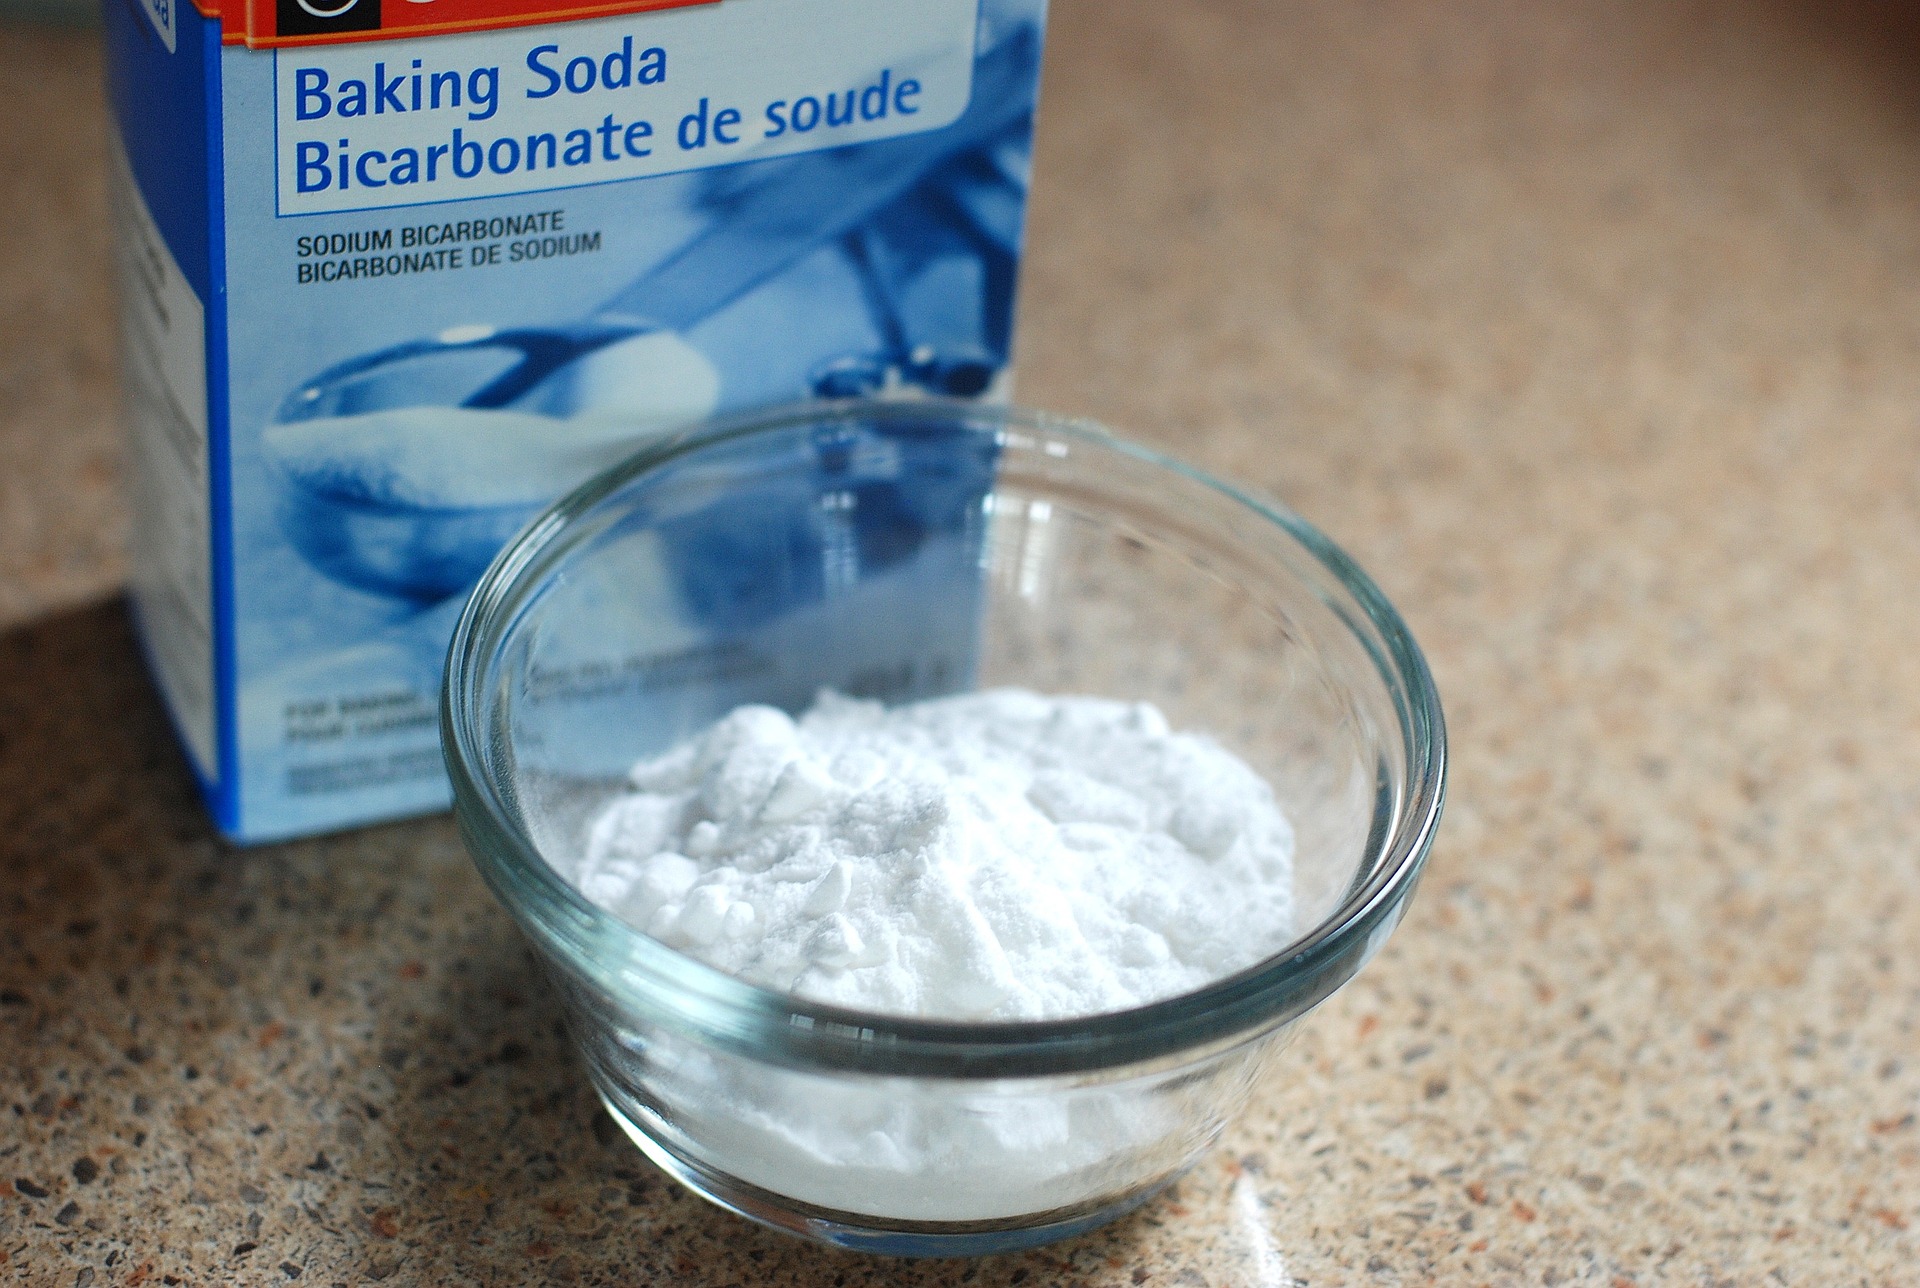 a box of baking soda with some in a bowl